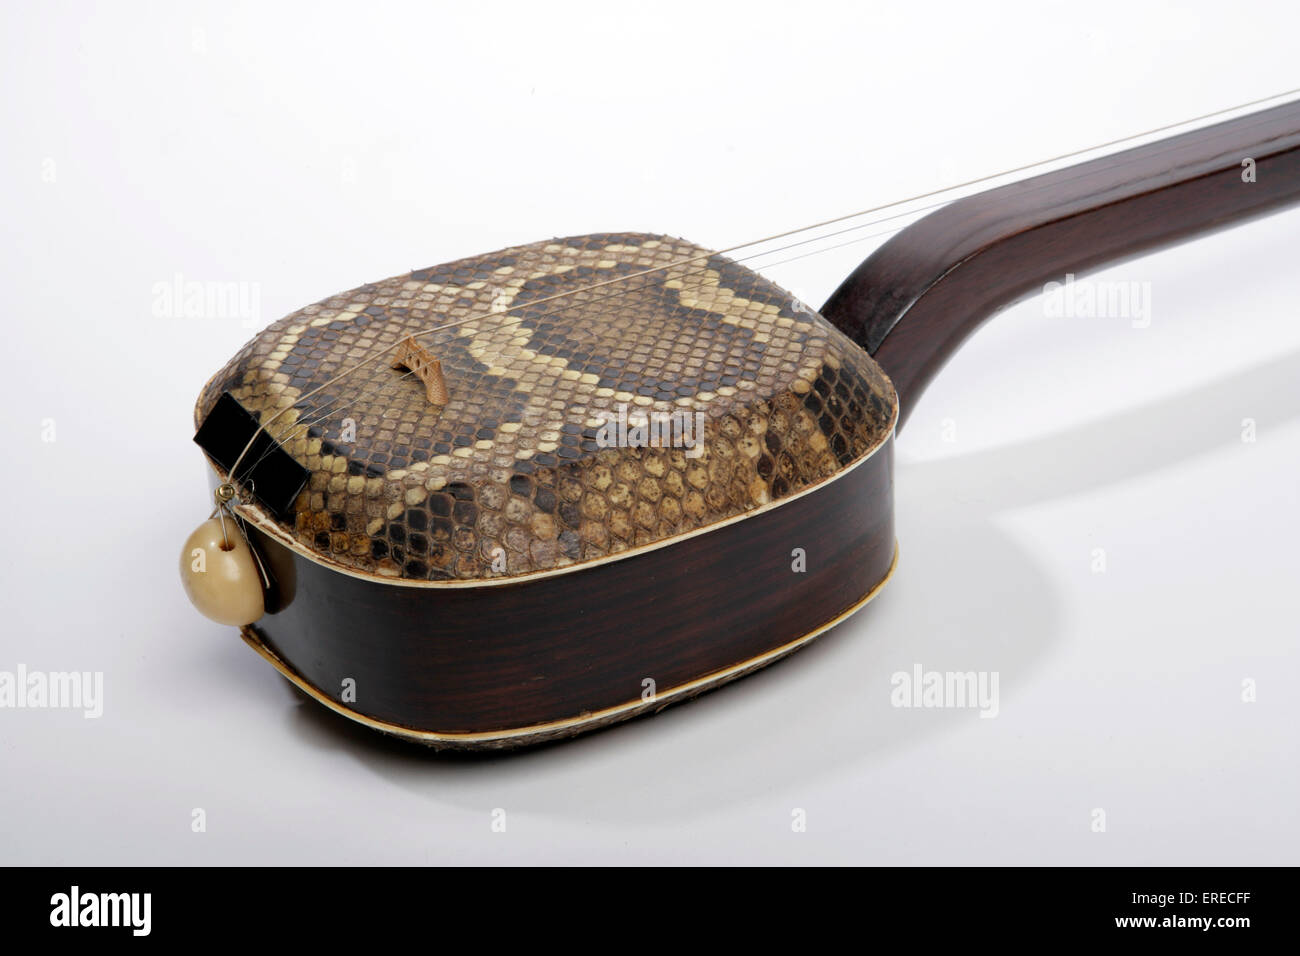 San Hsien or Sanxian, 3 stringed chinese lute. Detail of Python skin covered resonating or resonator box and bridge. Hsien Tse. Stock Photo